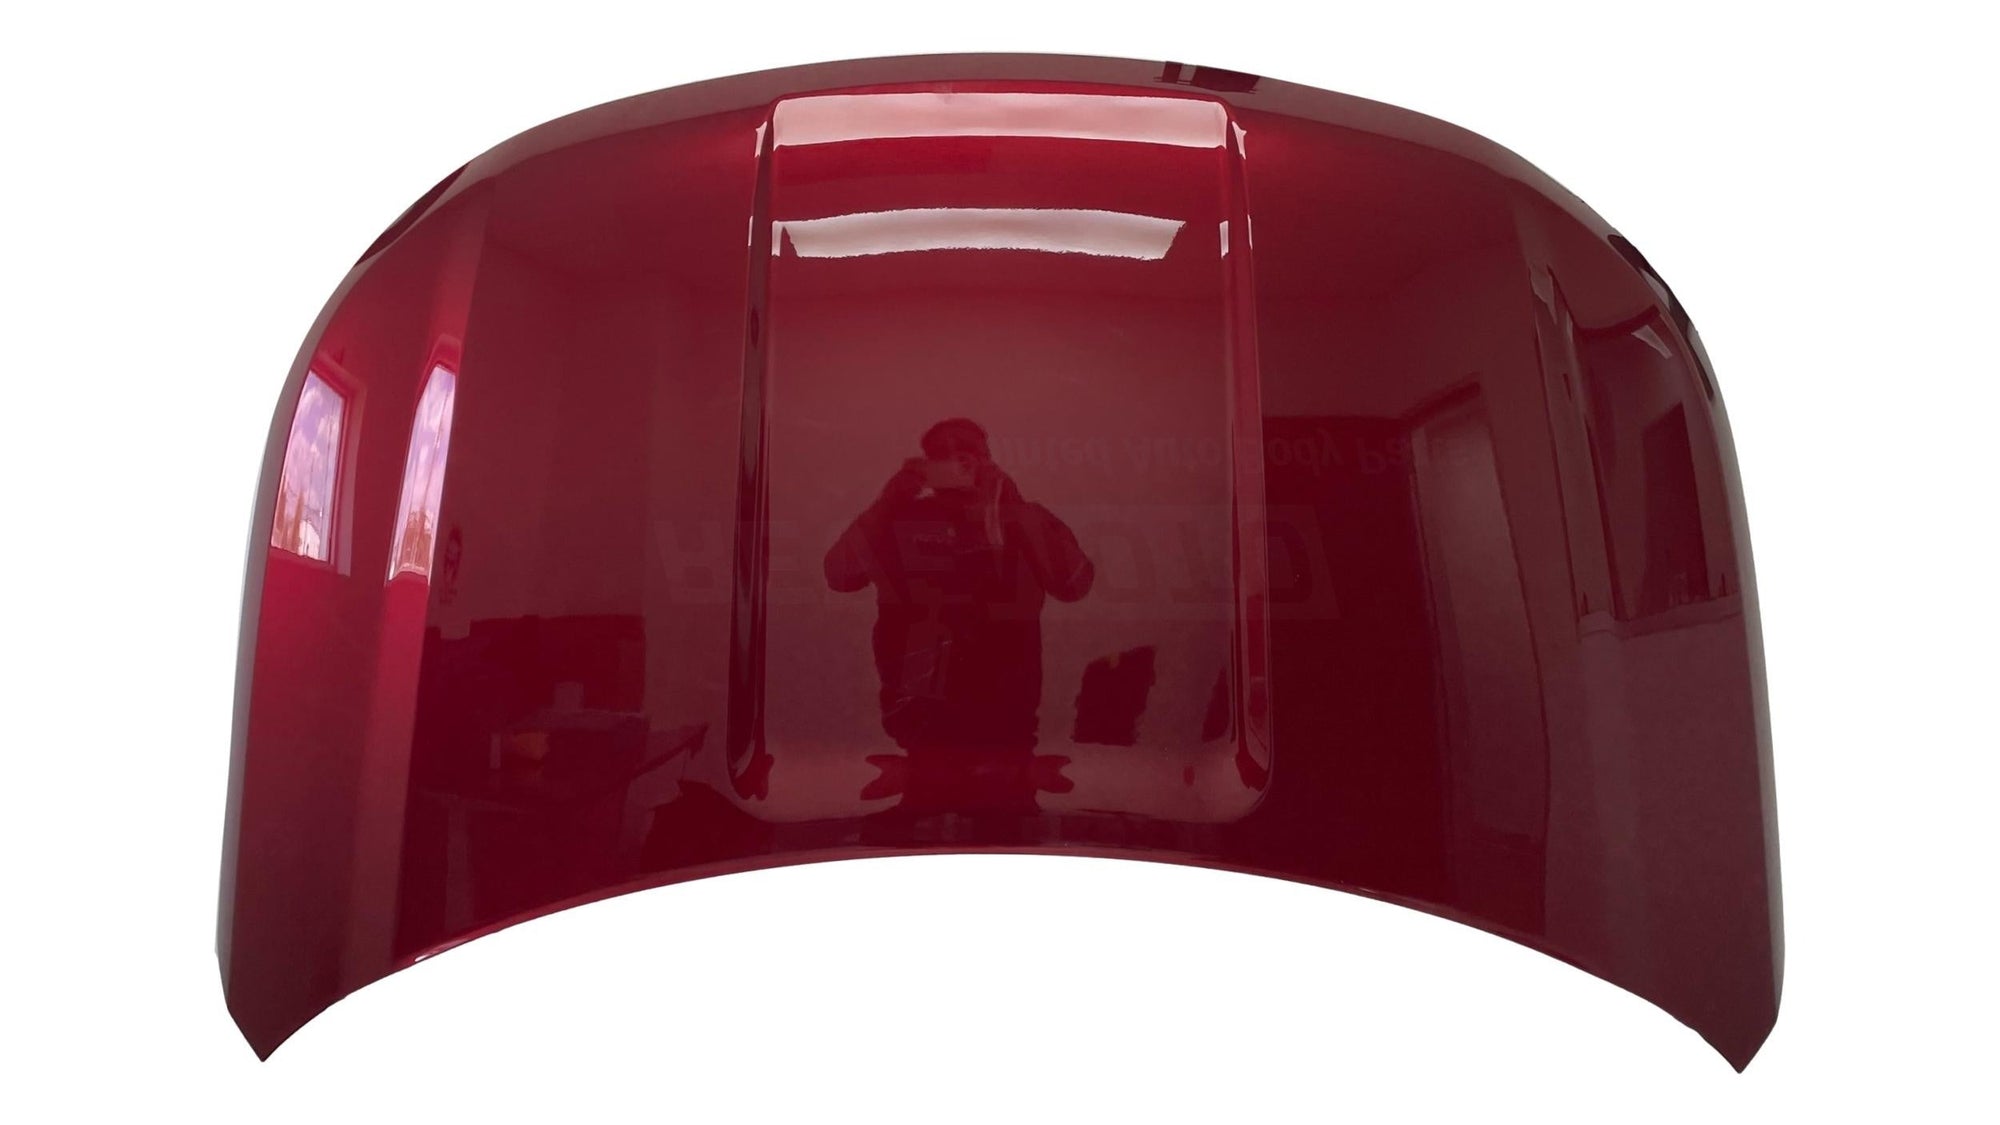 25491 - 2016-2019 Ford Explorer Hood Painted Ruby Red Metallic (RR) Aluminum FB5Z16612A FO1230315